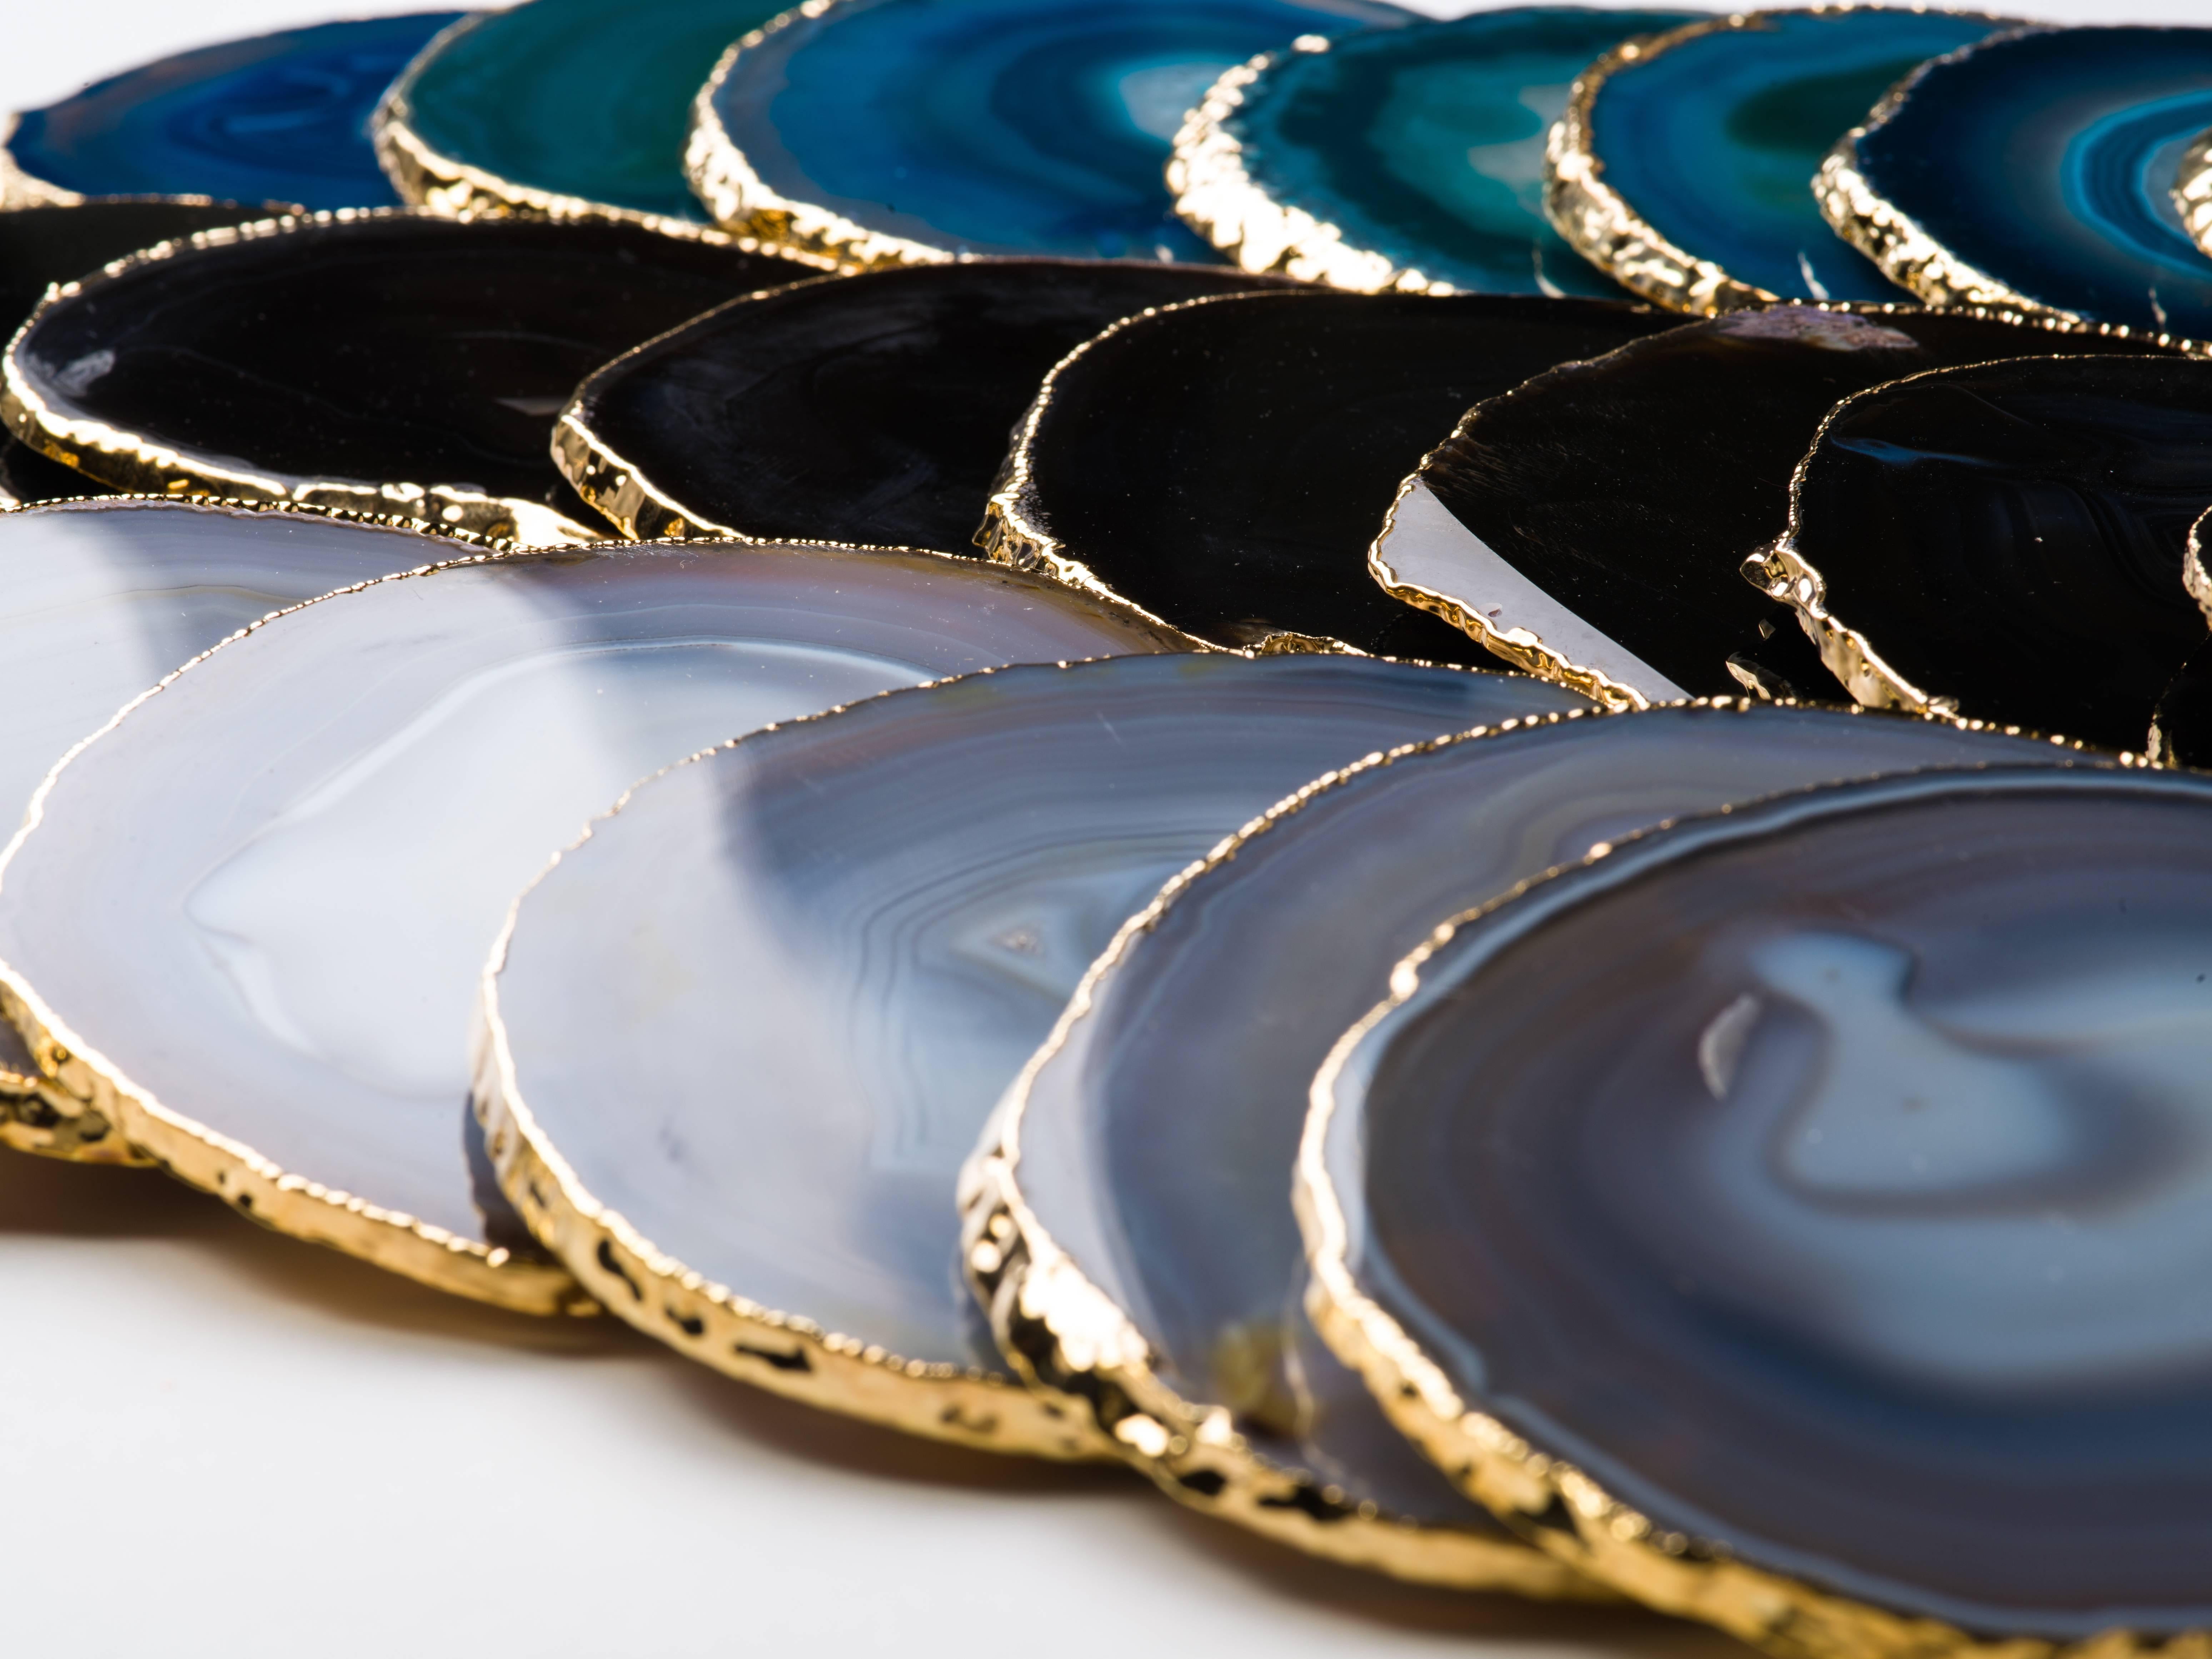 Set of Eight Semi-Precious Gemstone Coasters in Teal Wrapped in 24-Karat Gold 3